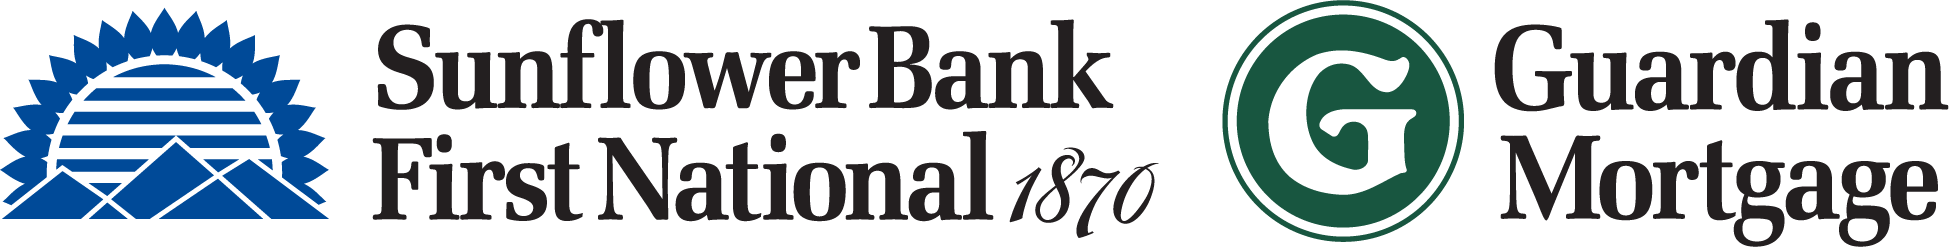 Sunflower Bank First National 1870 and Guardian Mortgage Logo